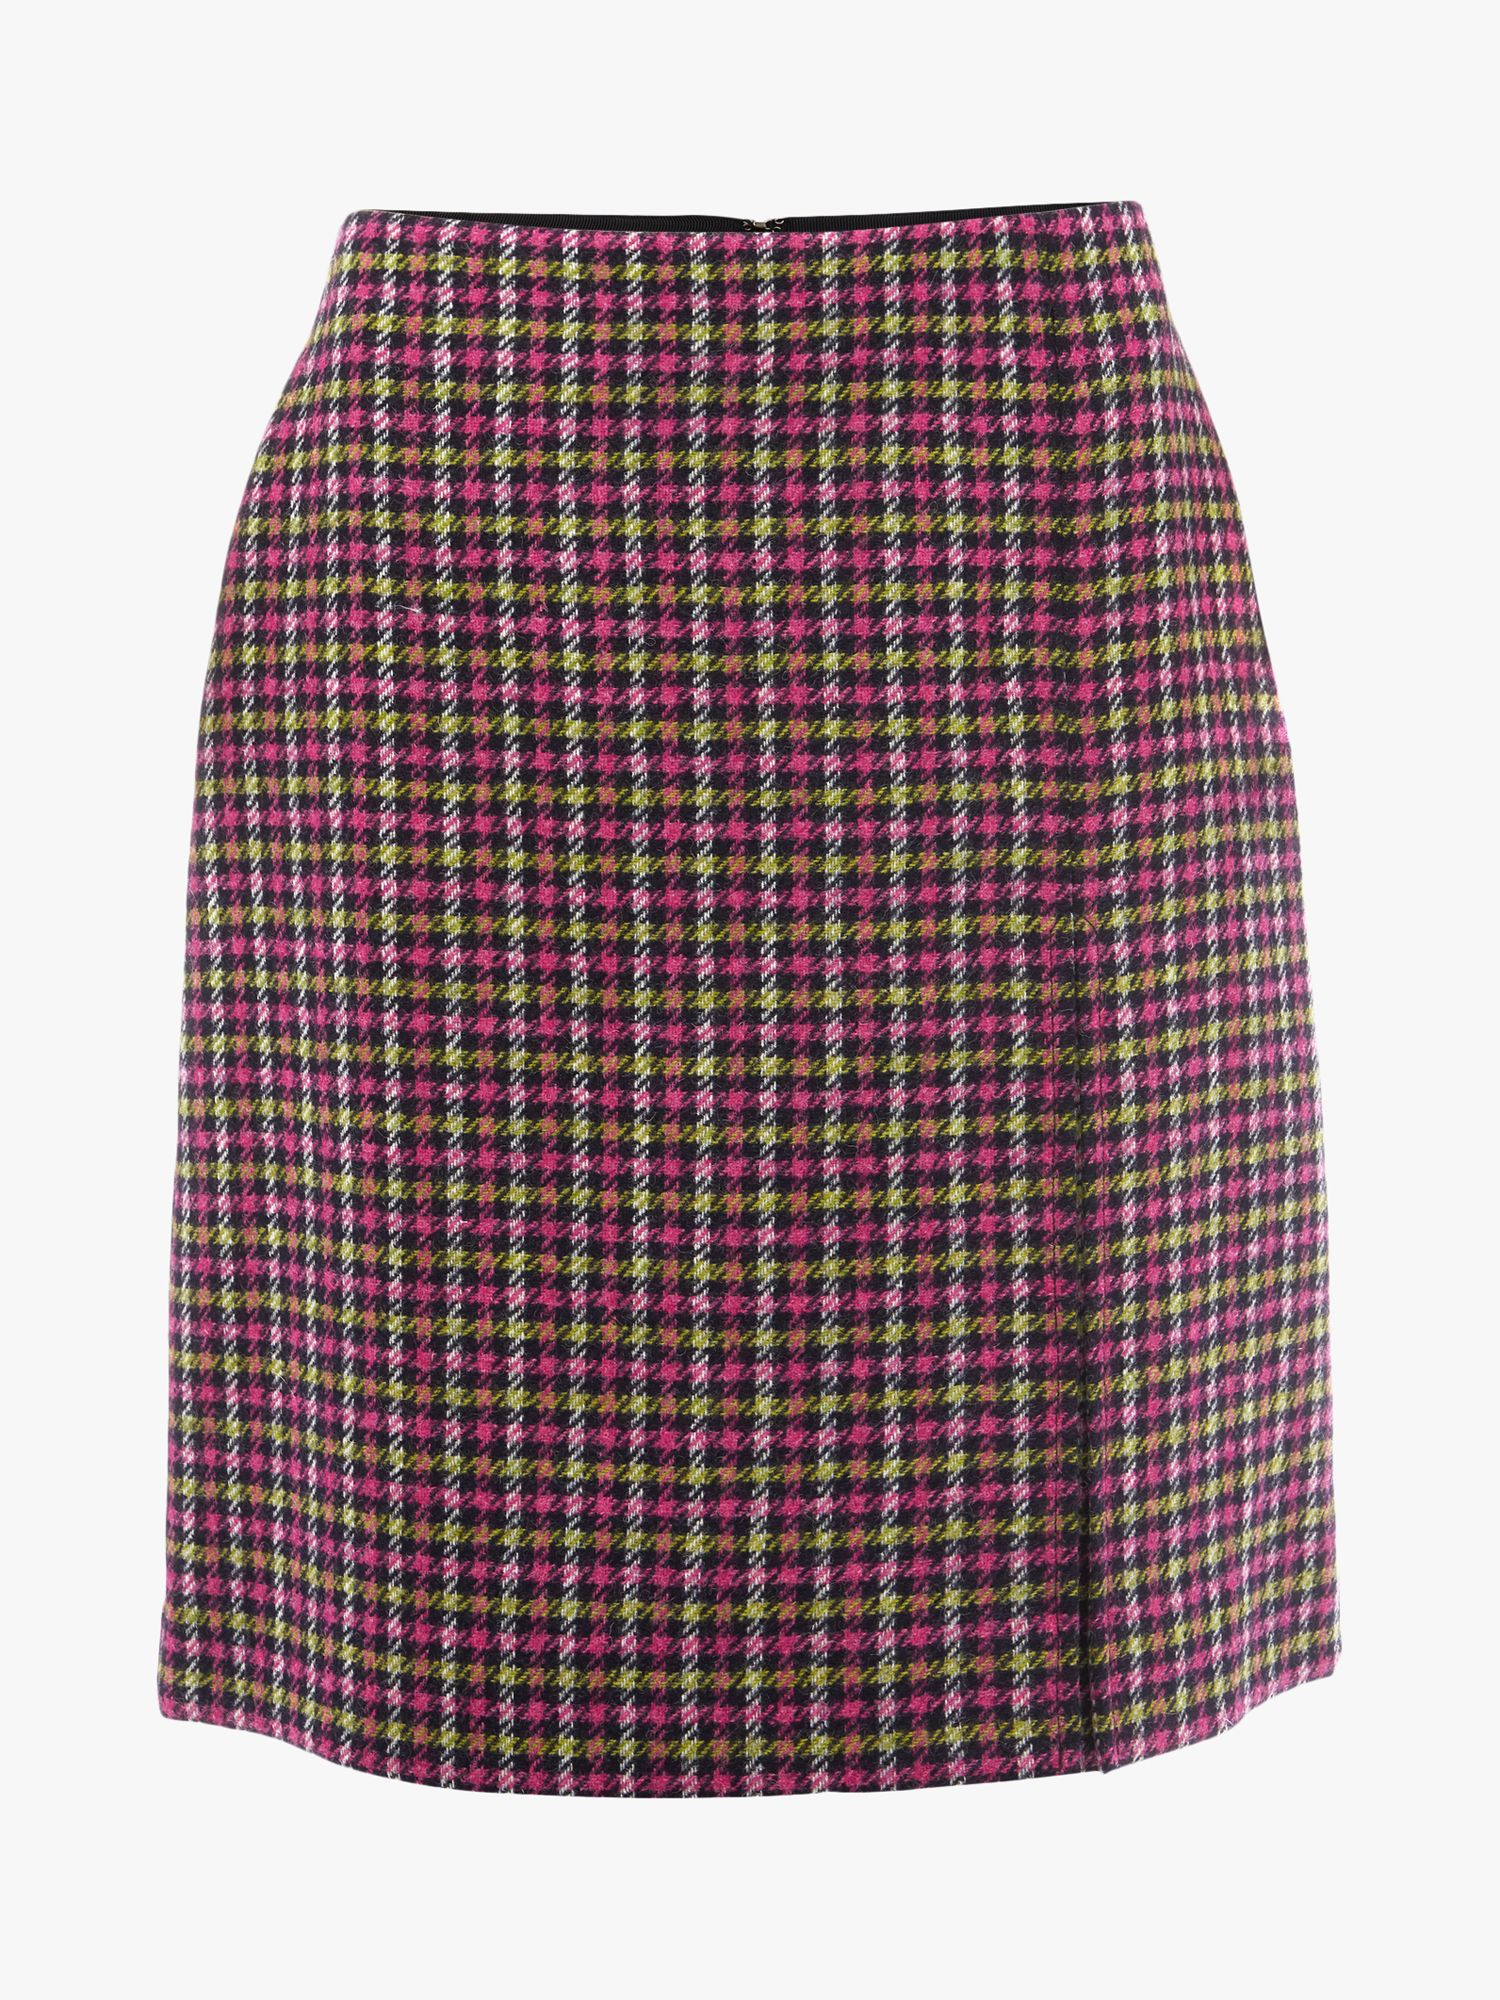 Hobbs Avery Pleat A-Line Checked Wool Skirt, Pink/Lime Green